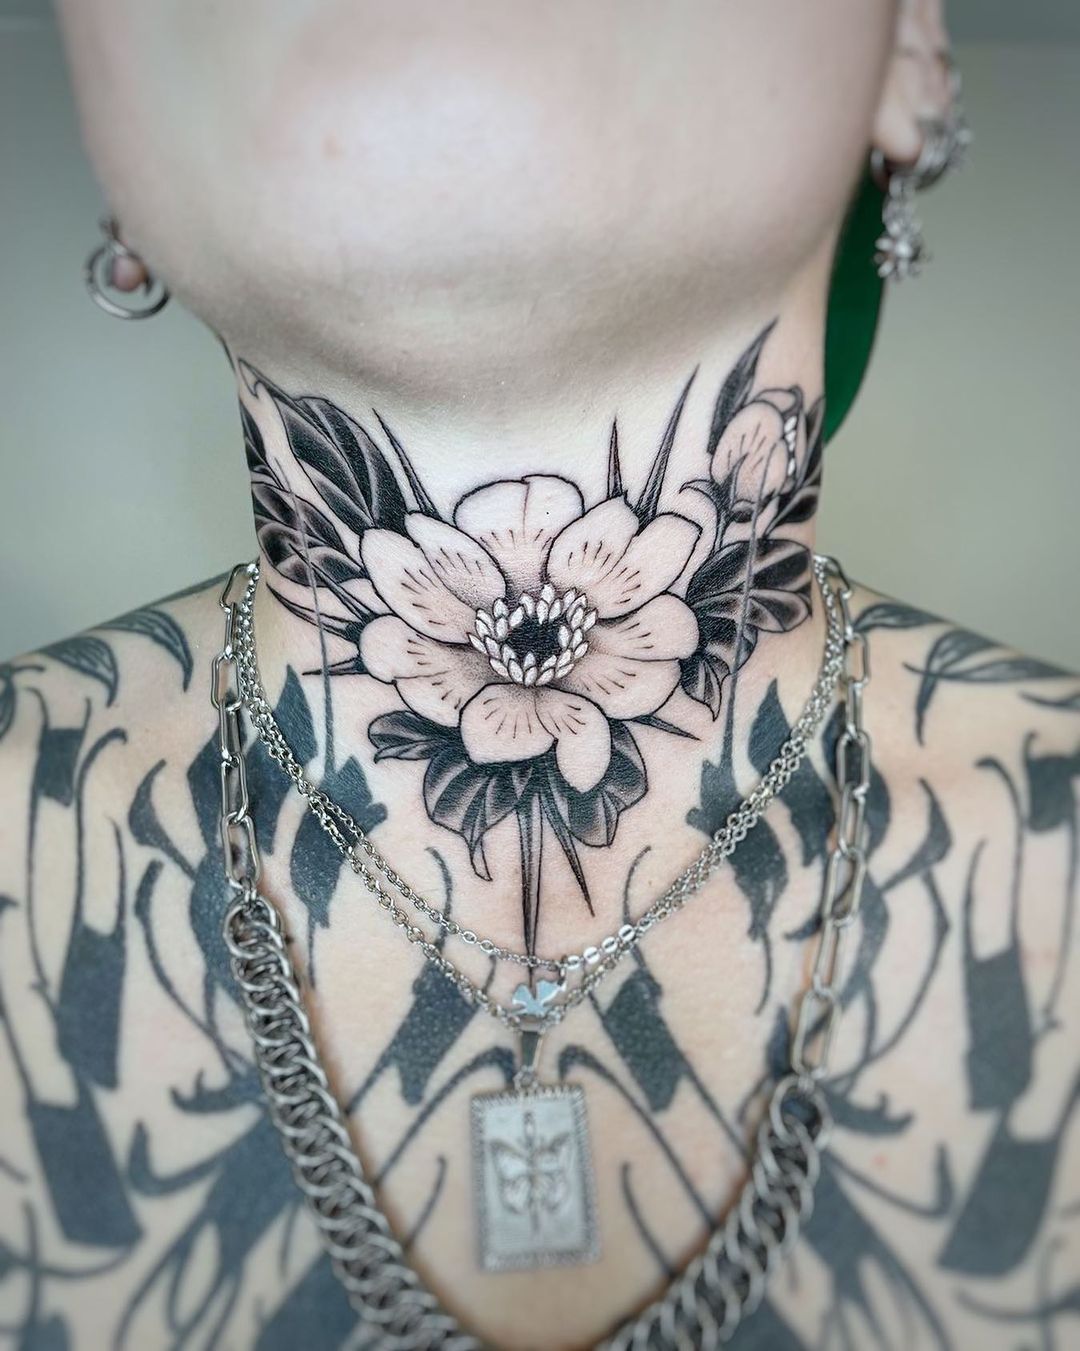 15 Incredible Neck Tattoos You Won't Regret - Society19